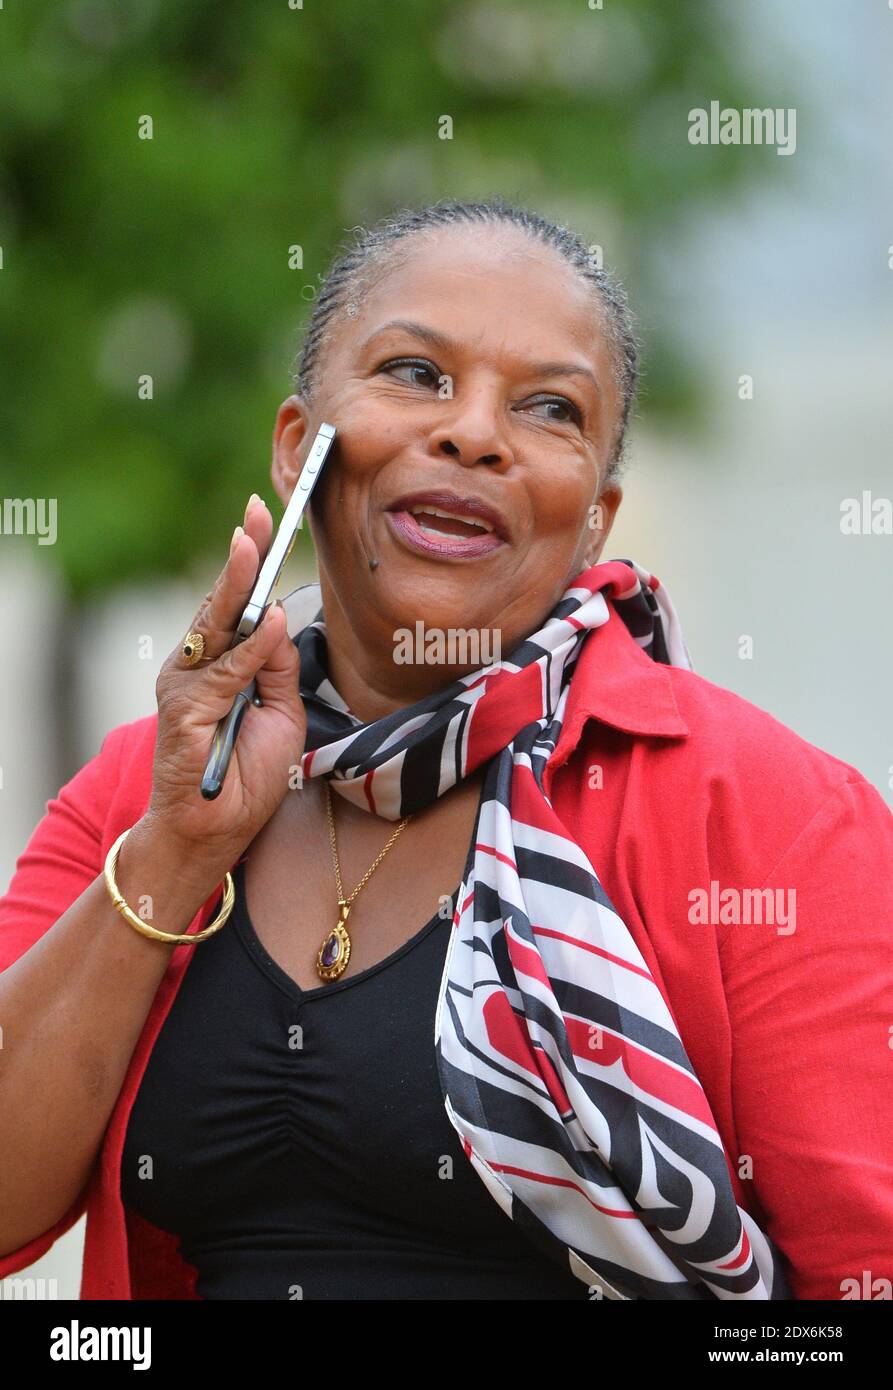 Justice Minister Christiane Taubira arriving at the Elysee presidential palace in Paris, France before a weekly cabinet meeting. French President Francois Hollande on August 27 installed a former banker and ally as economy minister in an emergency reshuffle seen as the 'last chance' to haul France out of the biggest crisis of his presidency. Hollande caught everyone off guard with the appointment of Emmanuel Macron, a 36-year-old ex-Rothschild banker and architect of the president's economic policy. Photo by Christian Liewig/ABACAPRESS.COM Stock Photo